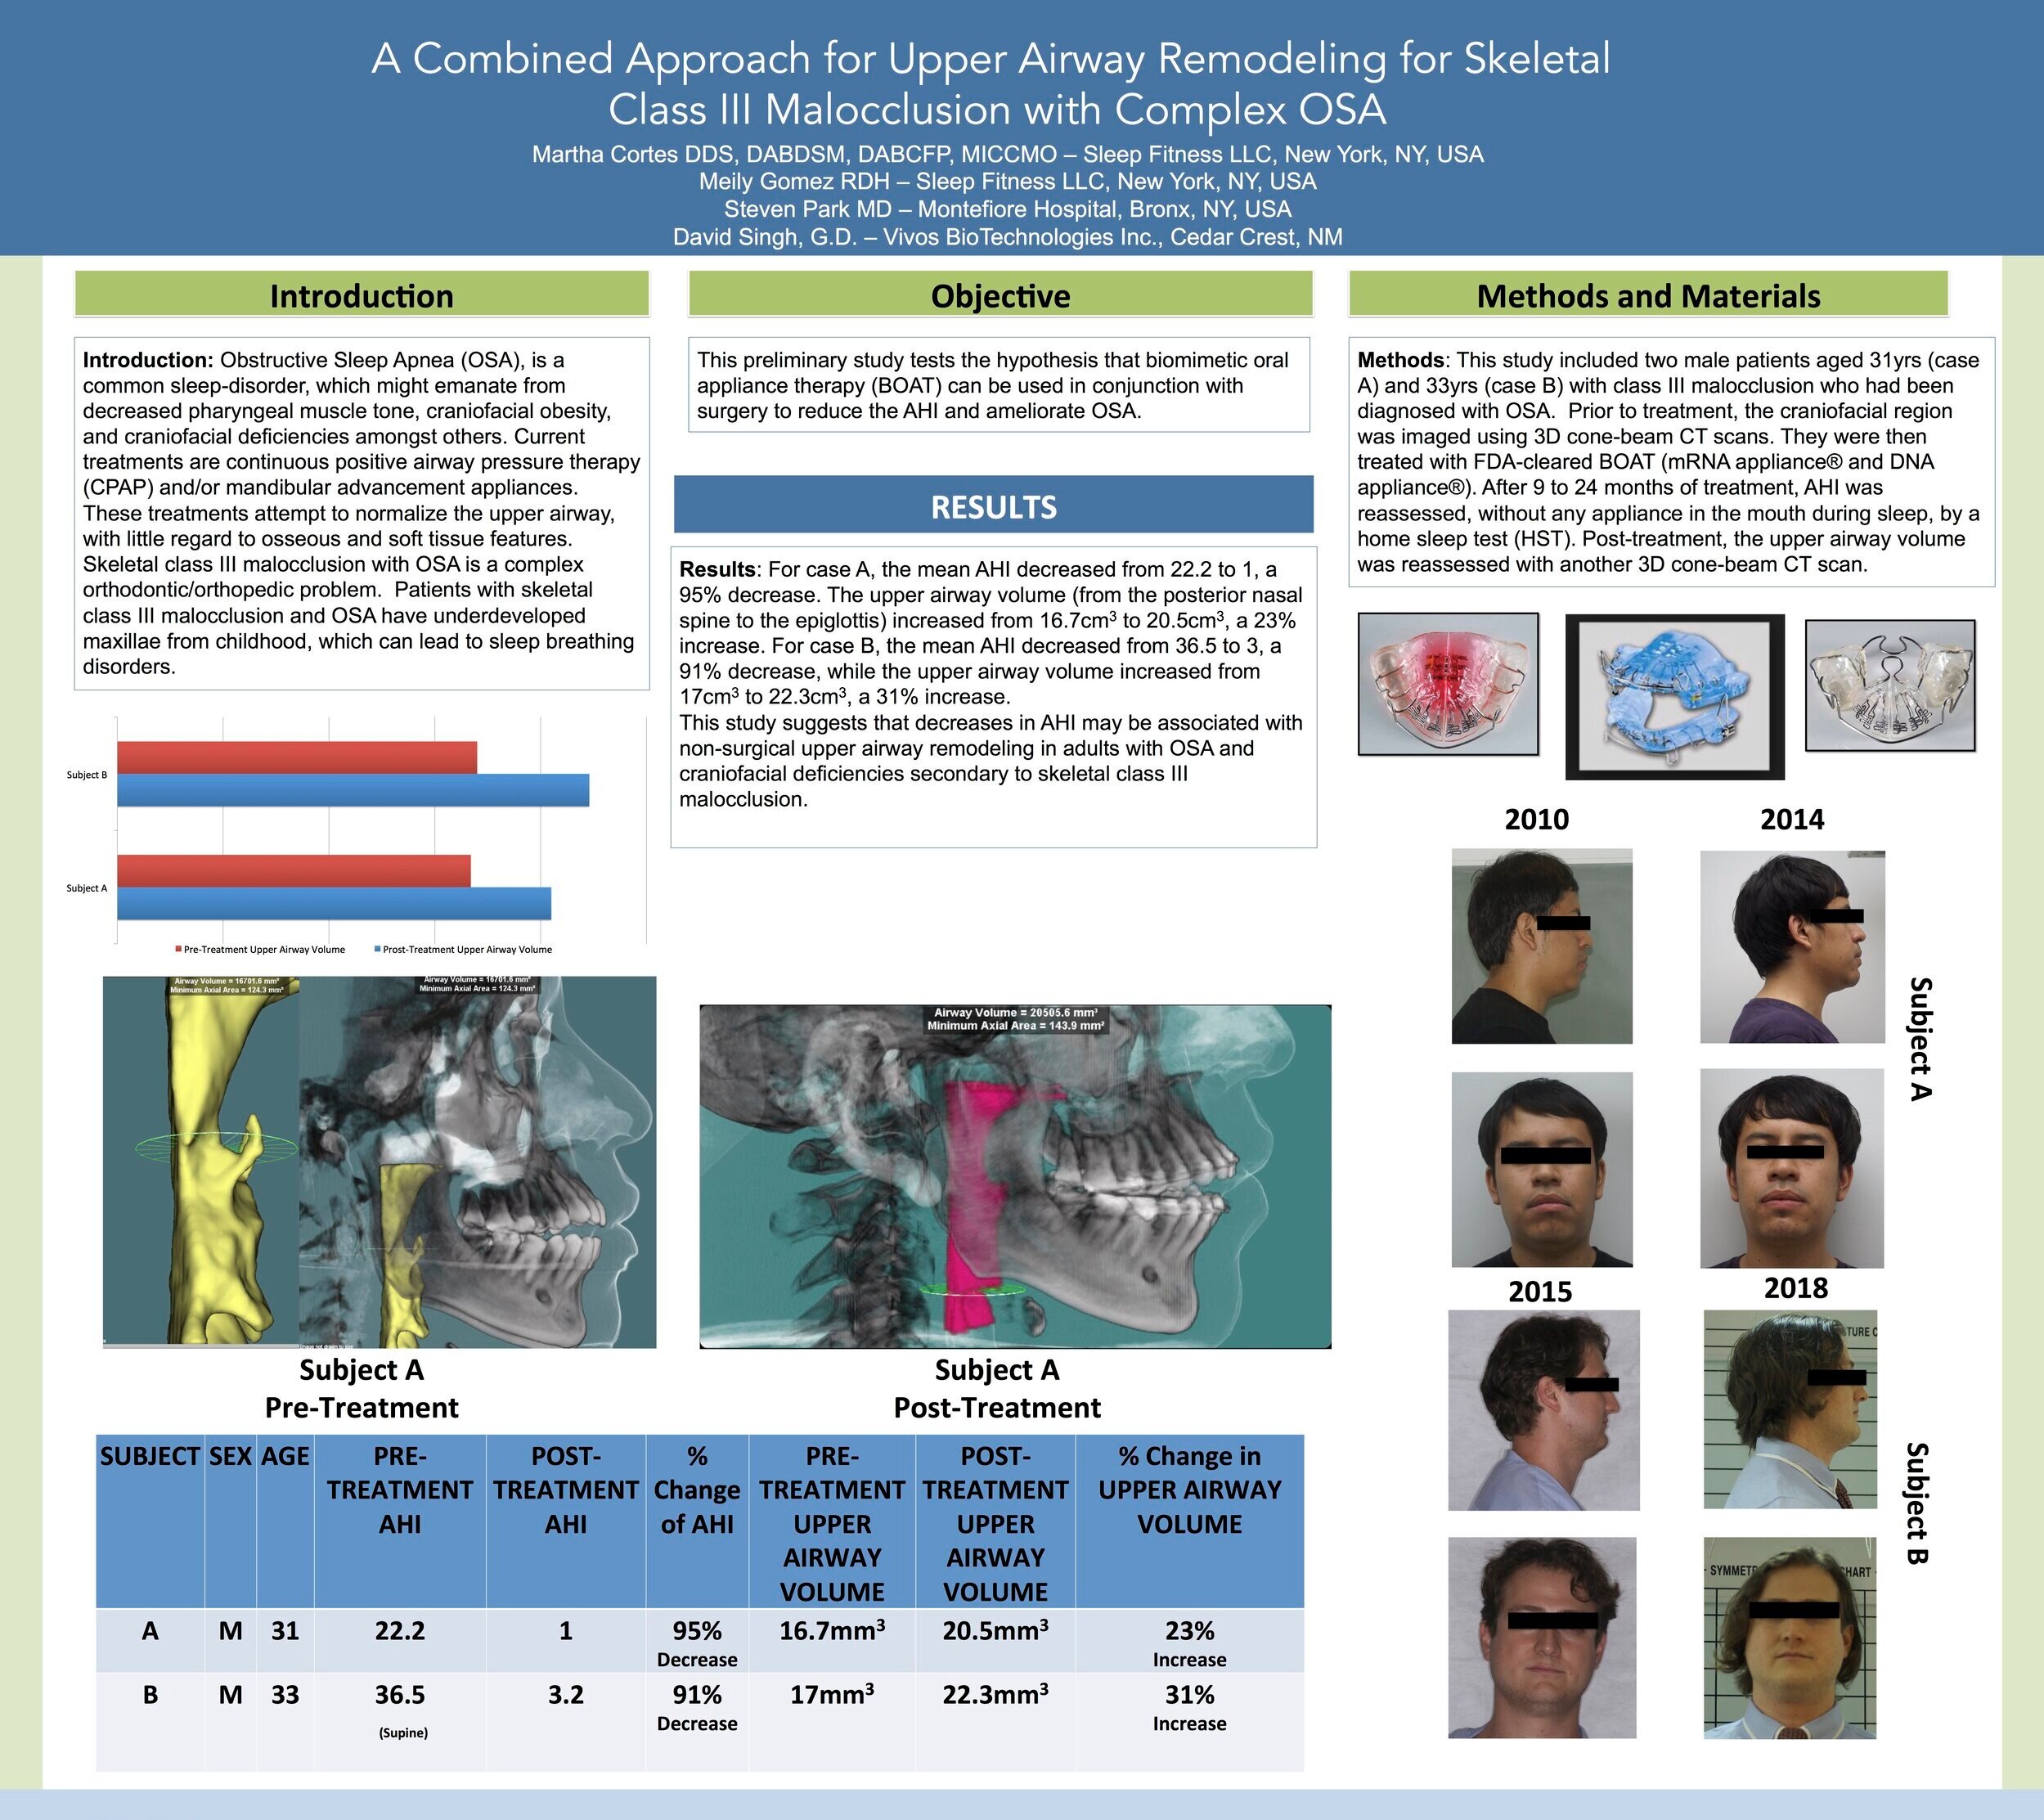  AASM Poster Presentation on A Combined Approach to Upper Airway Remodeling for Skeletal Class III Malocclusion with Complex OSA 